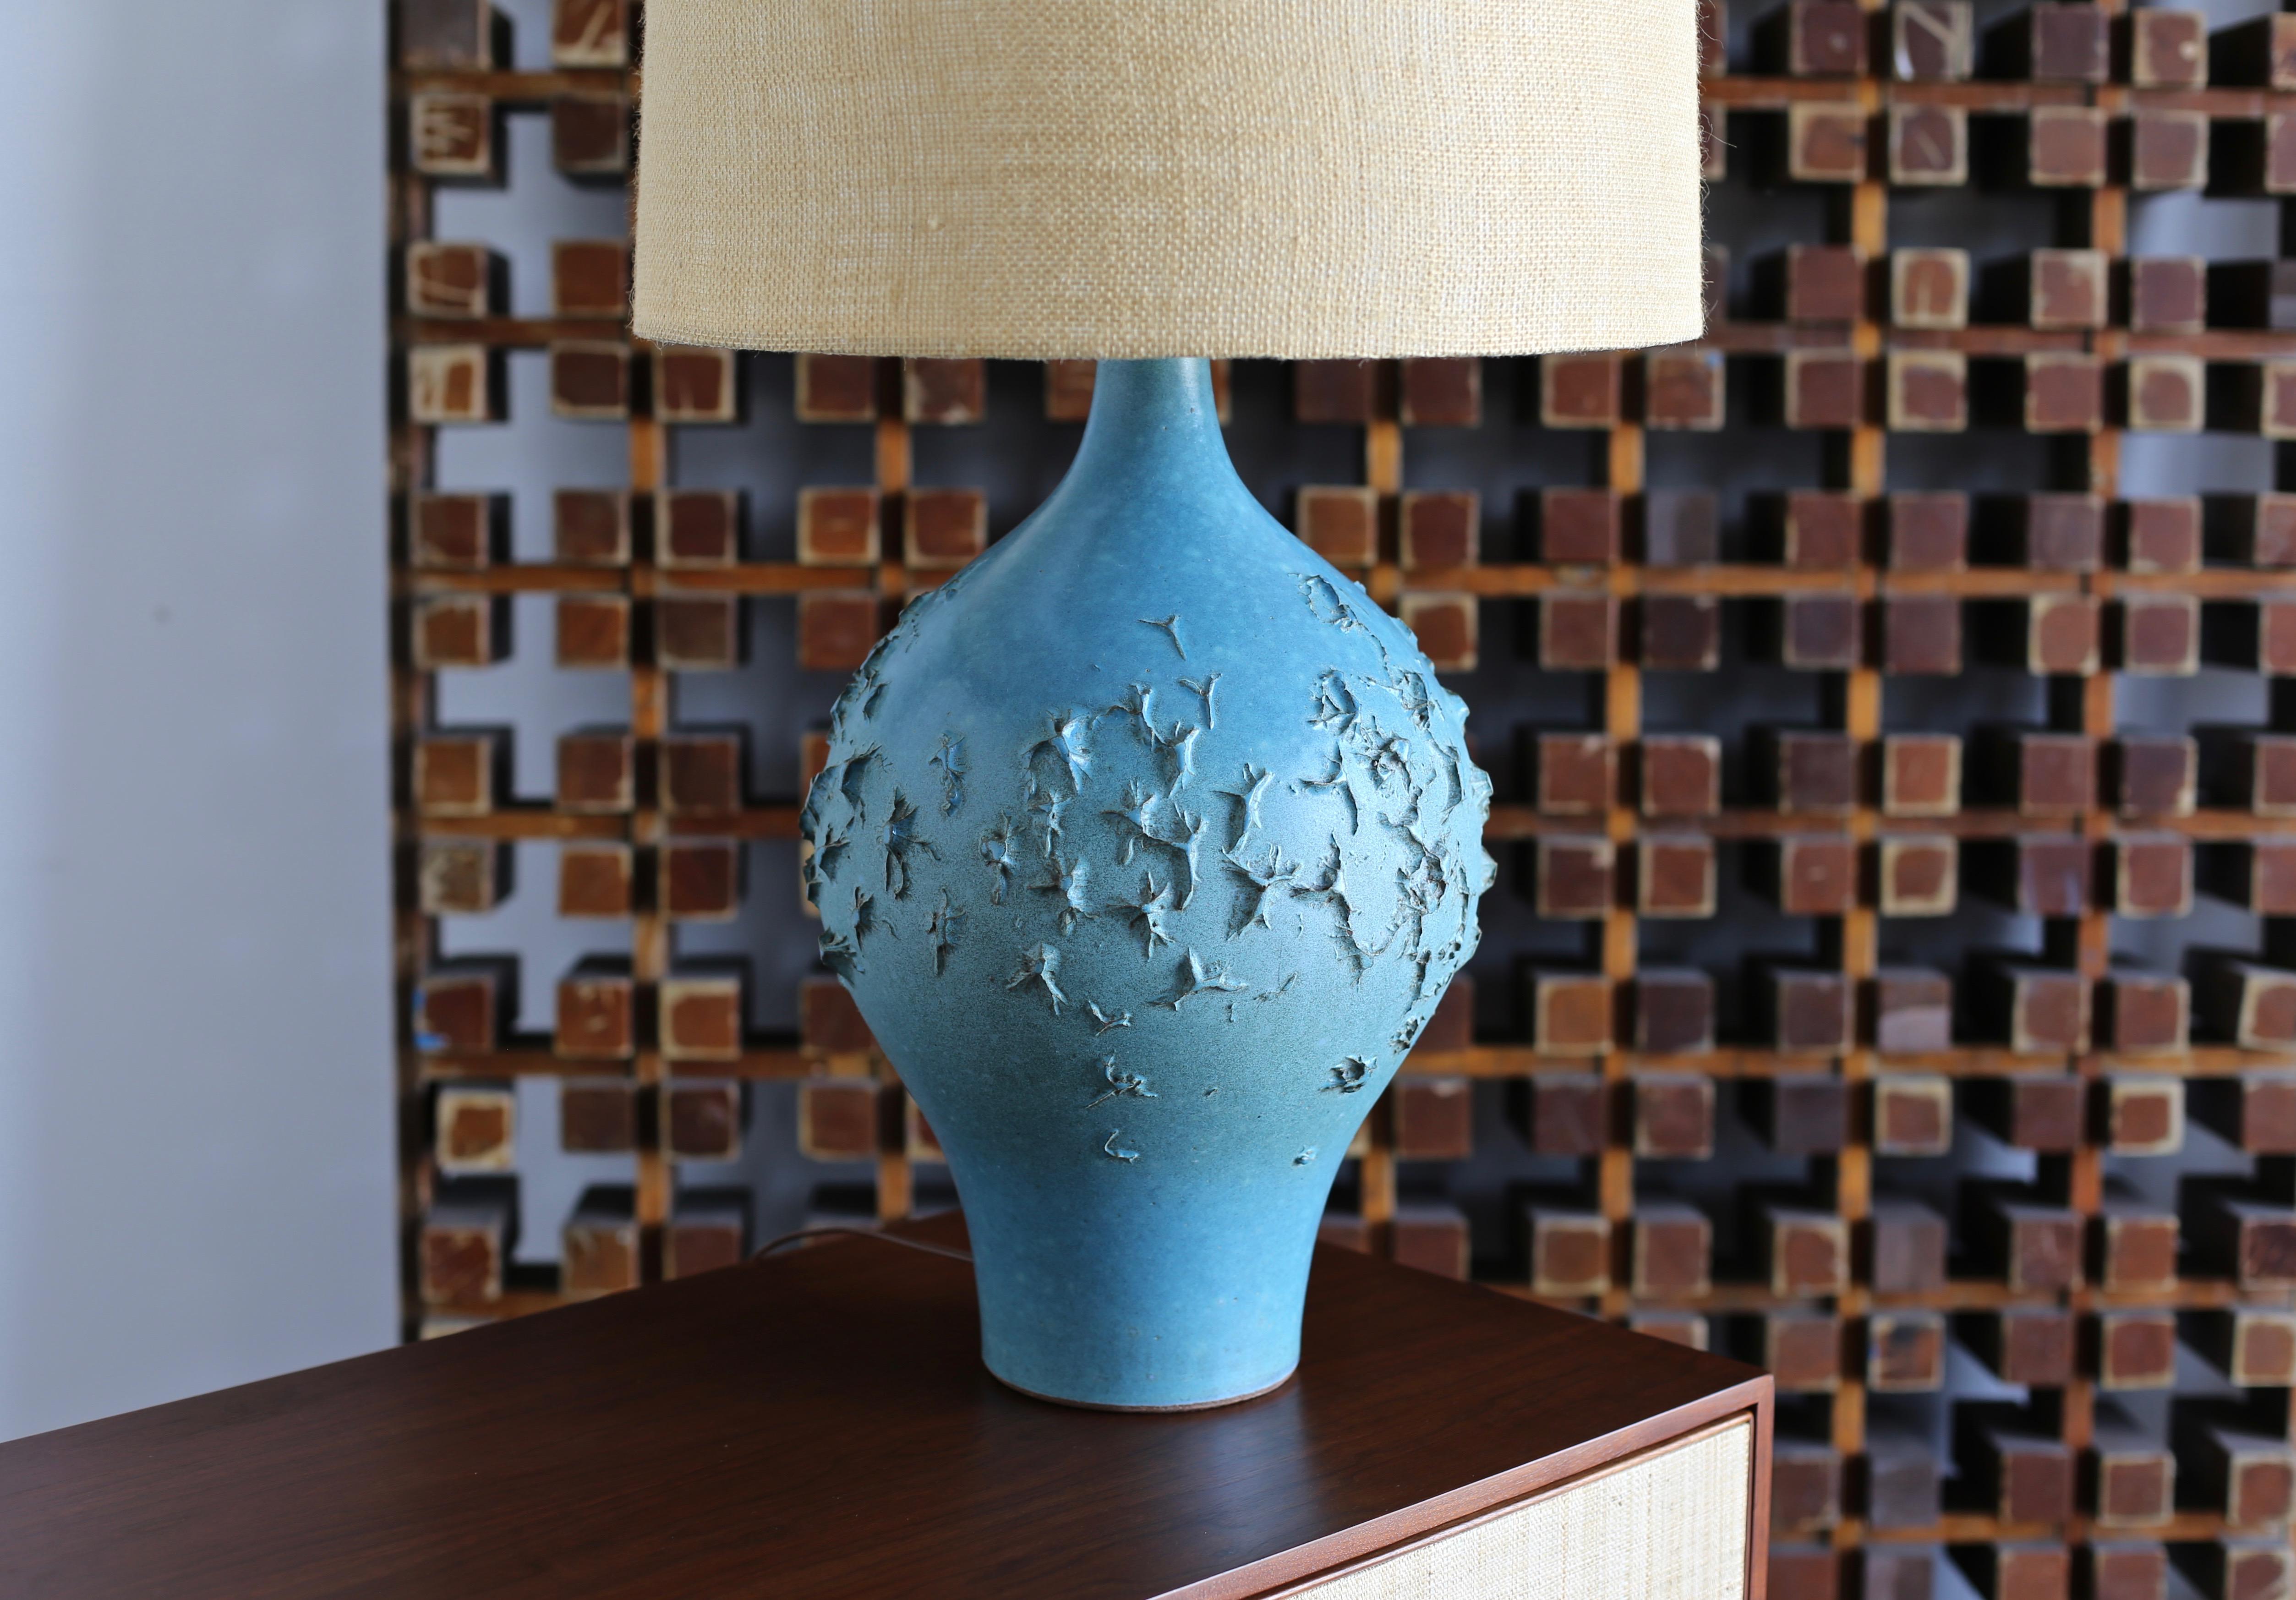 Lee Rosen for design technics blue ceramic lamp, circa 1960.

The measurements listed include the shade.